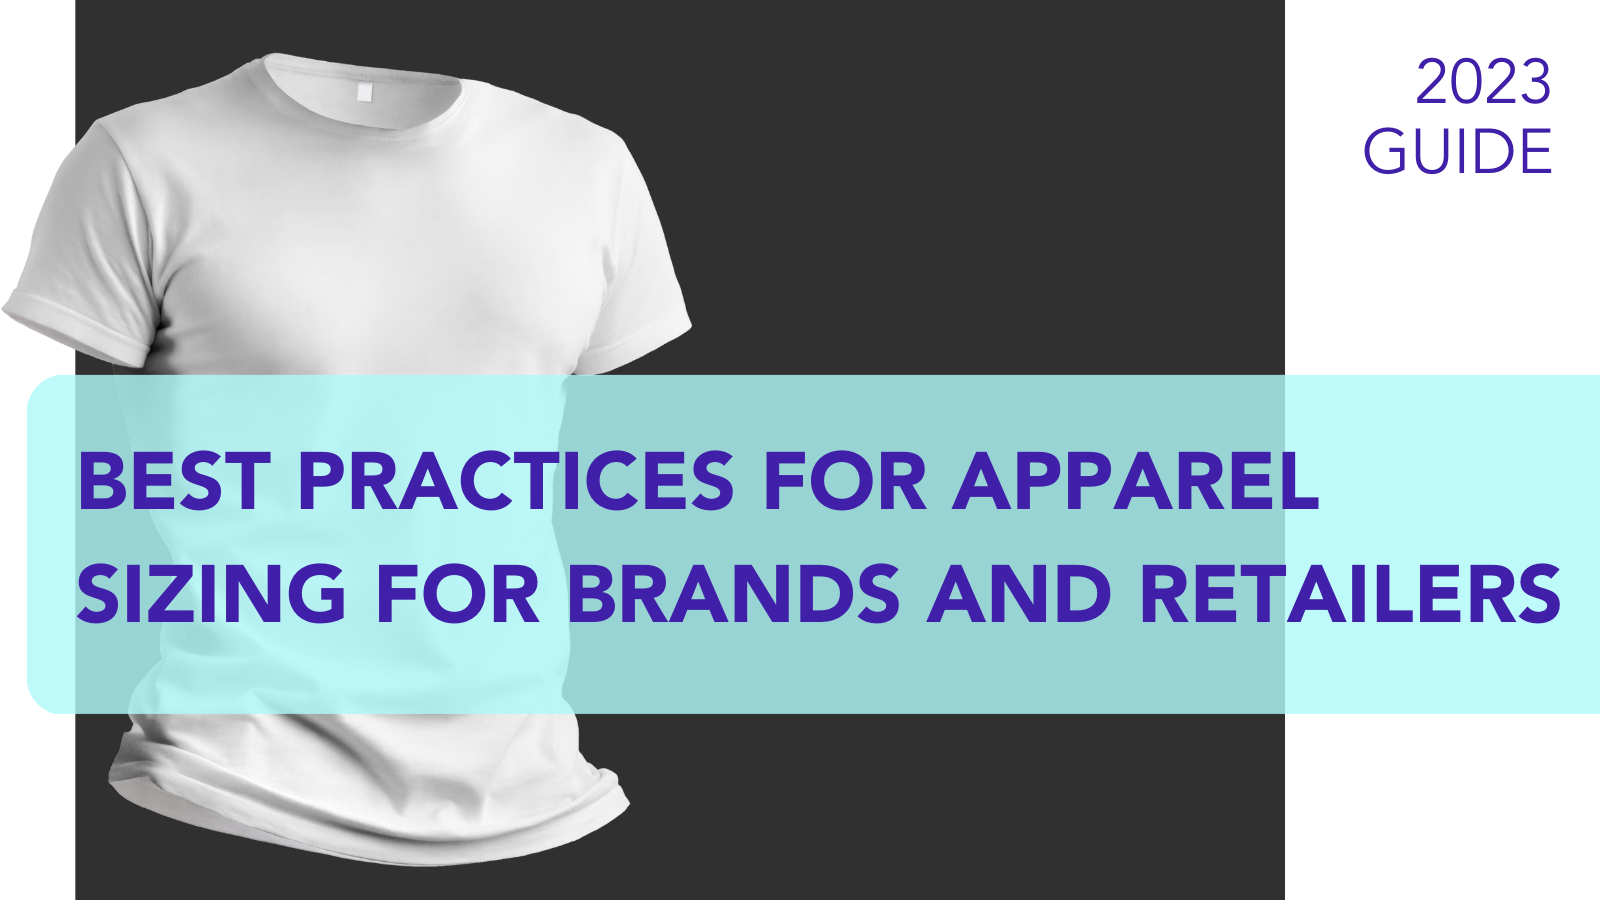 Best Practices For Apparel Sizing For Brands and Retailers